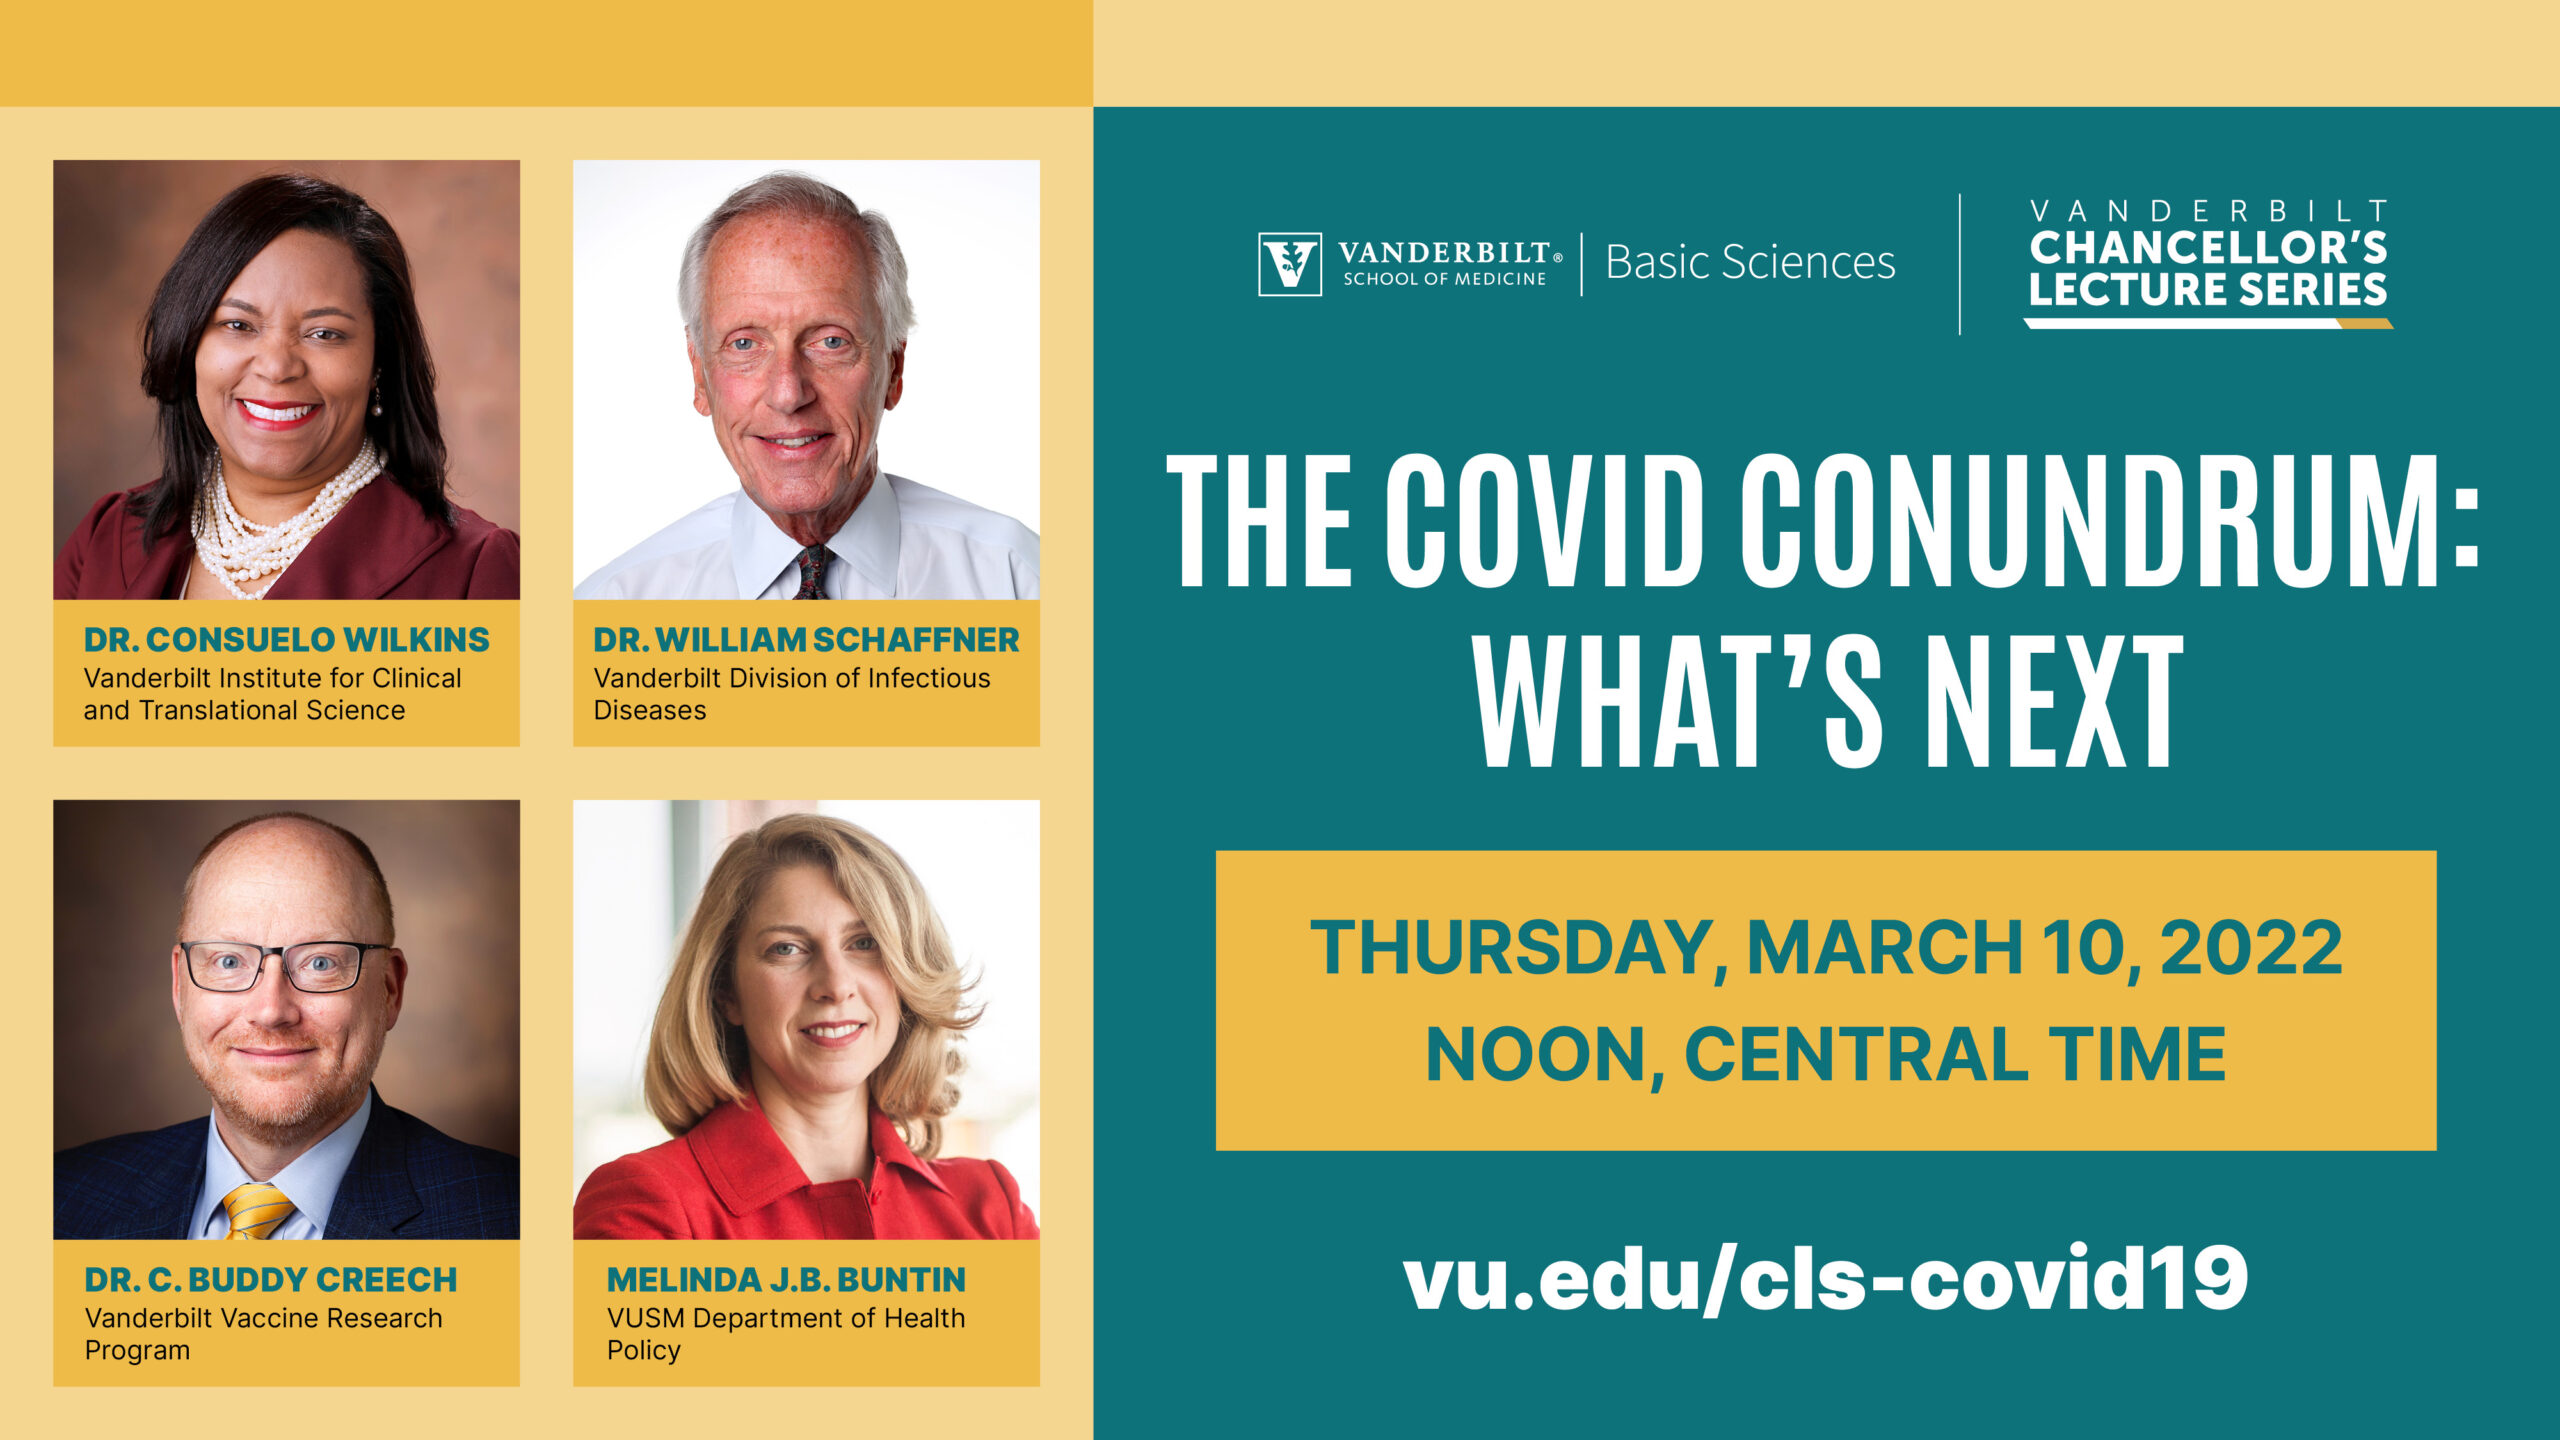 WATCH: Experts discuss what’s next in the COVID-19 pandemic